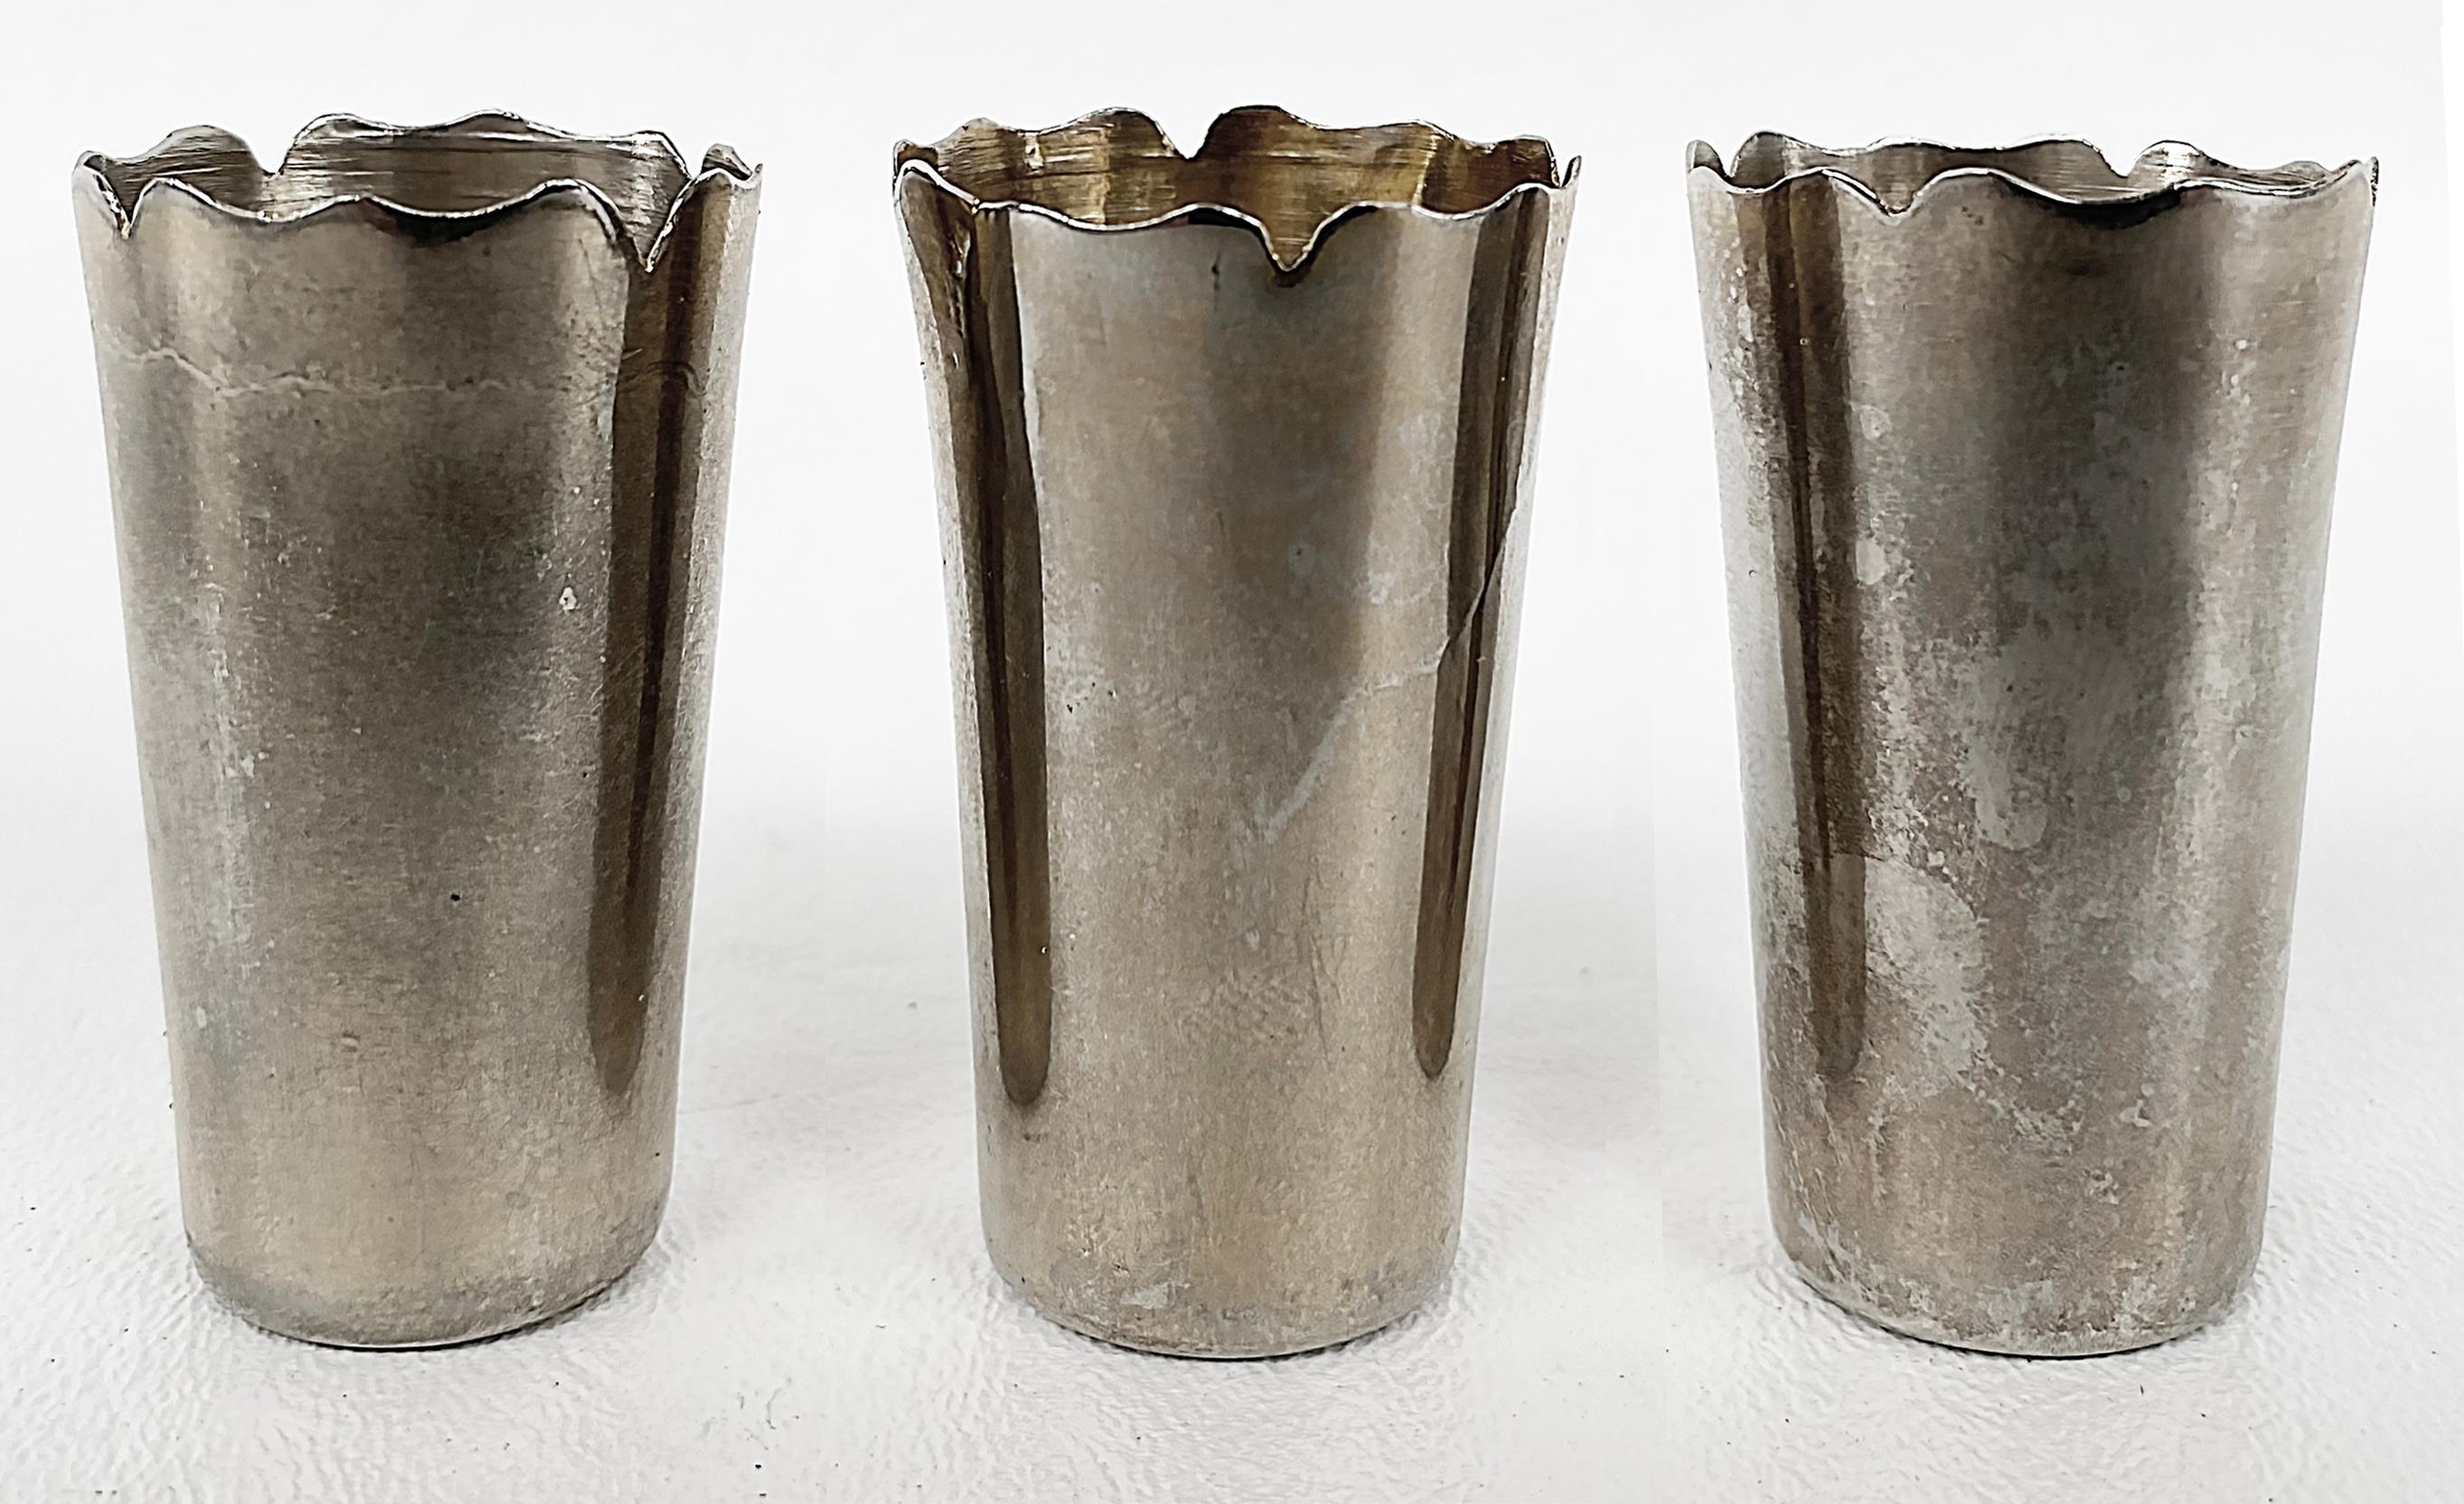 20th Century Vintage Sterling Silver Shot Glasses with Scalloped Edges, Set of Three